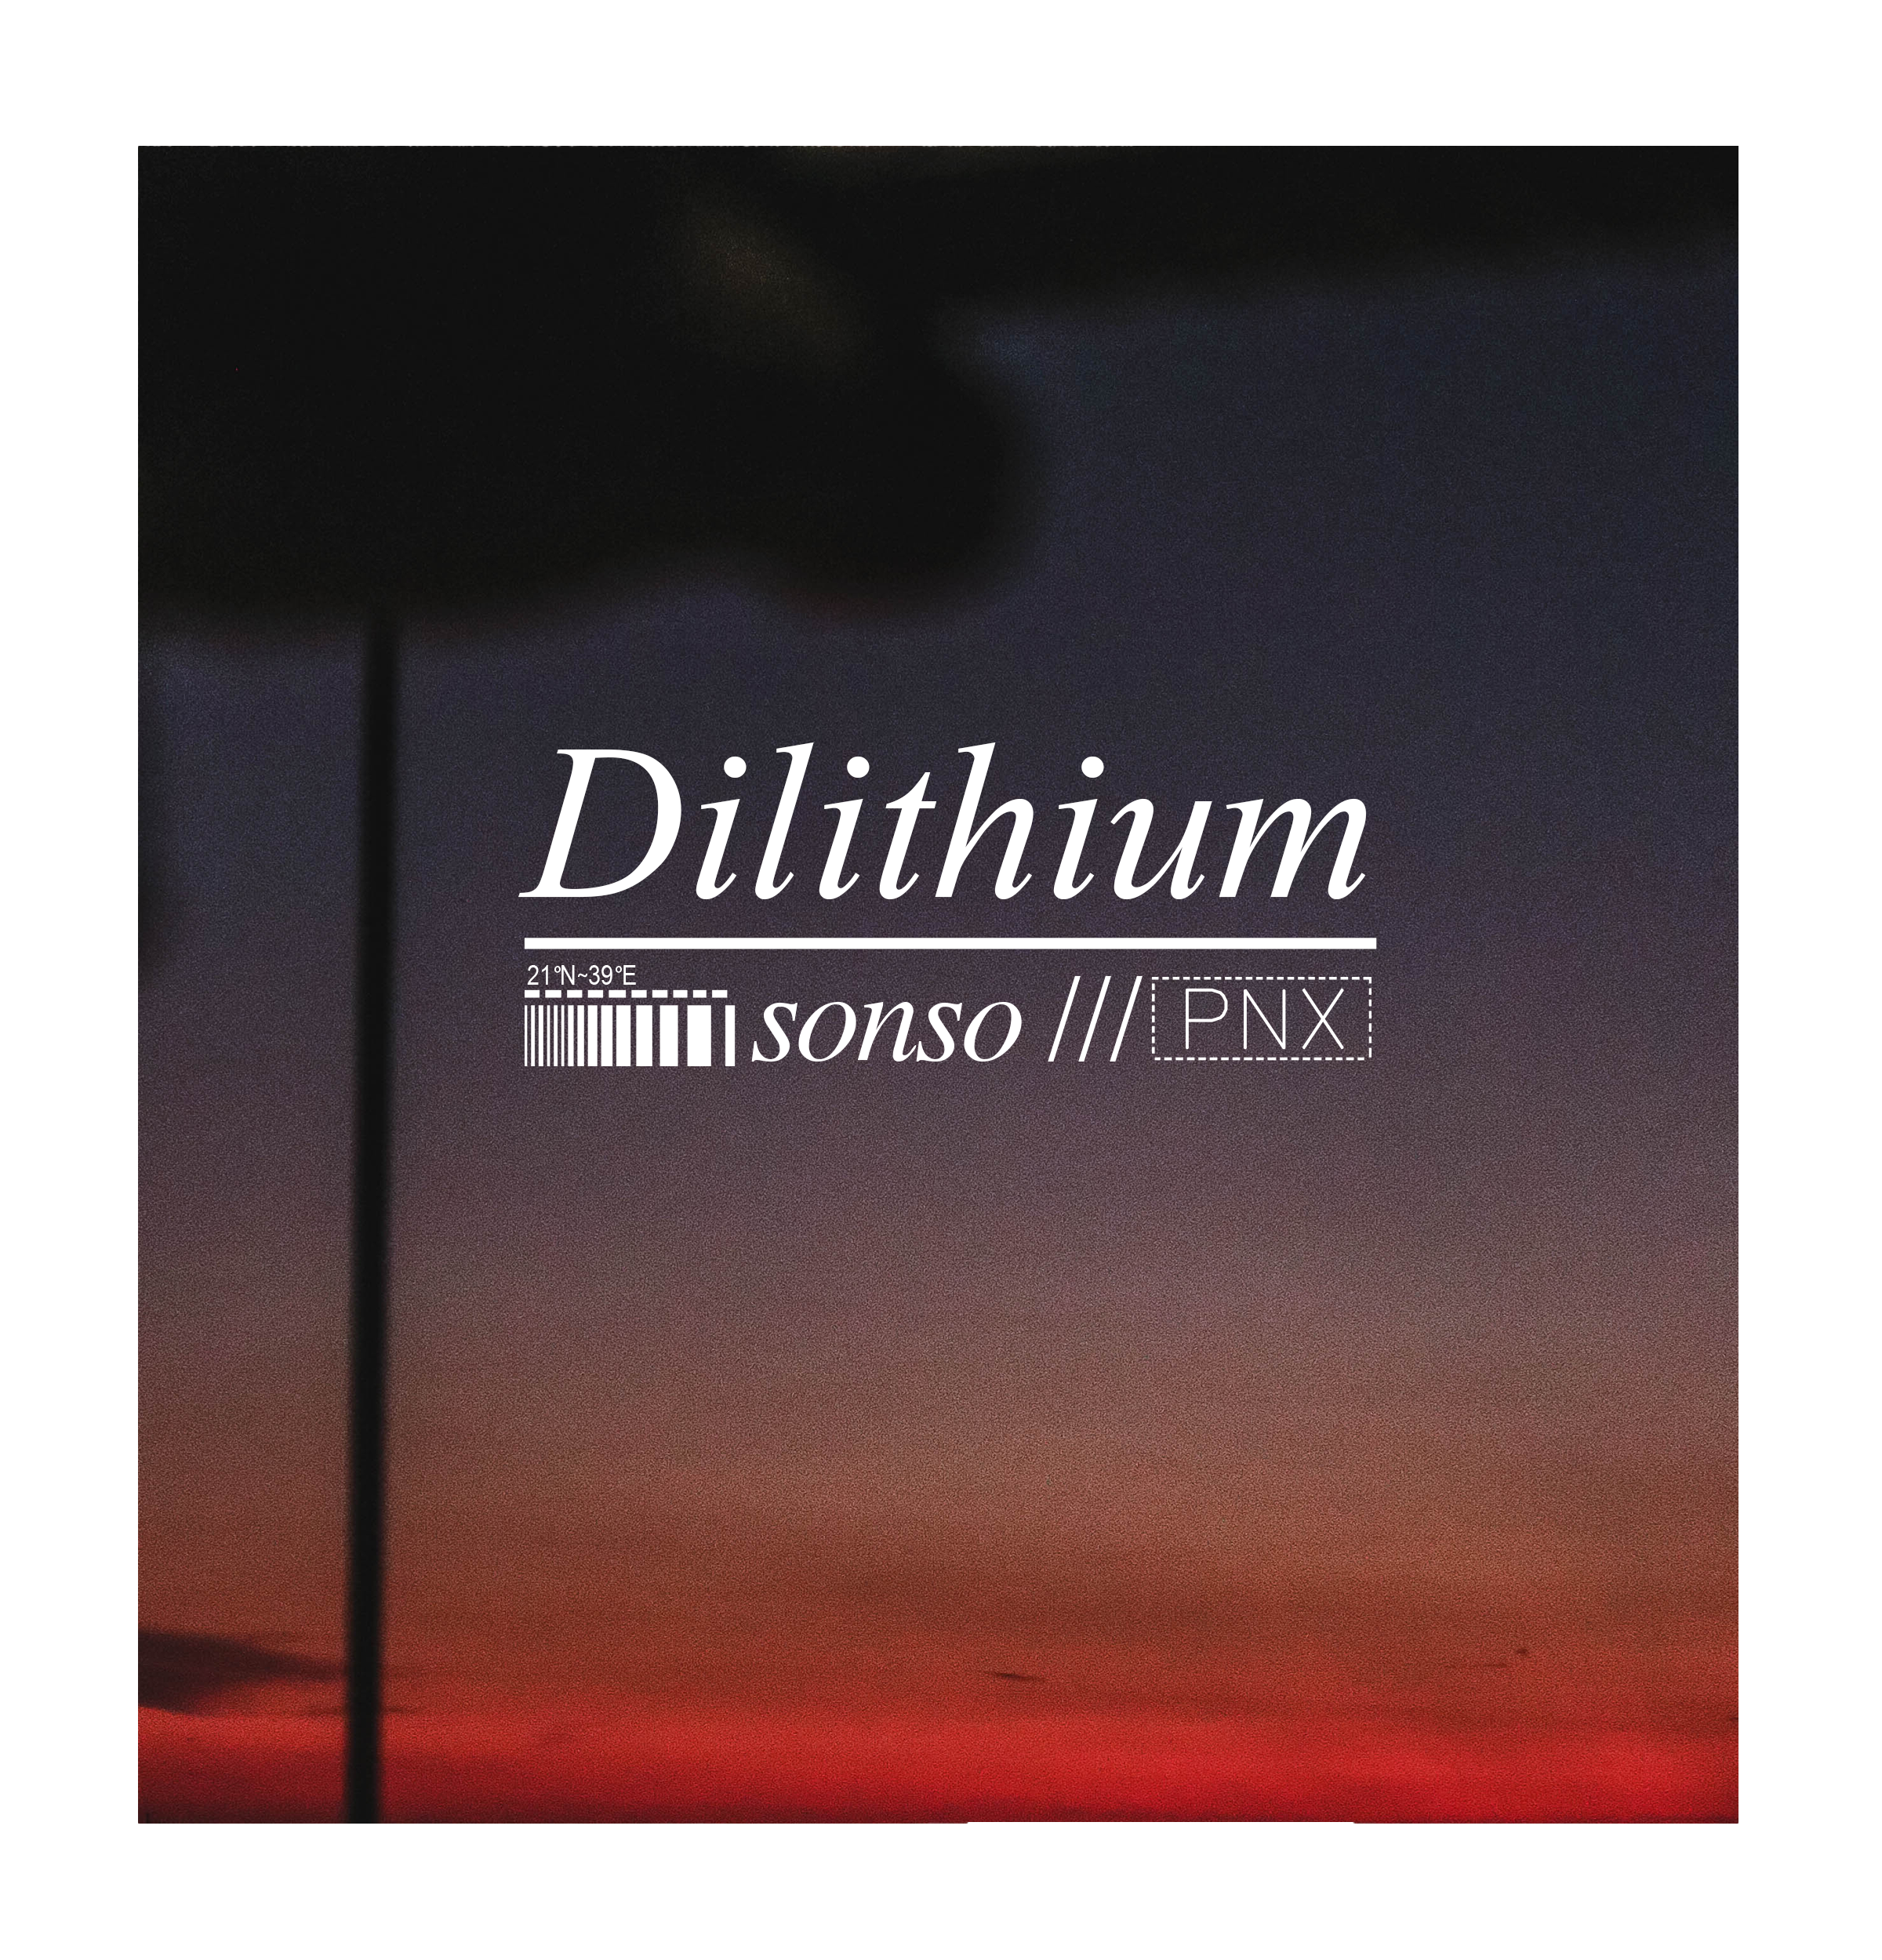 Dilithium - Sonso